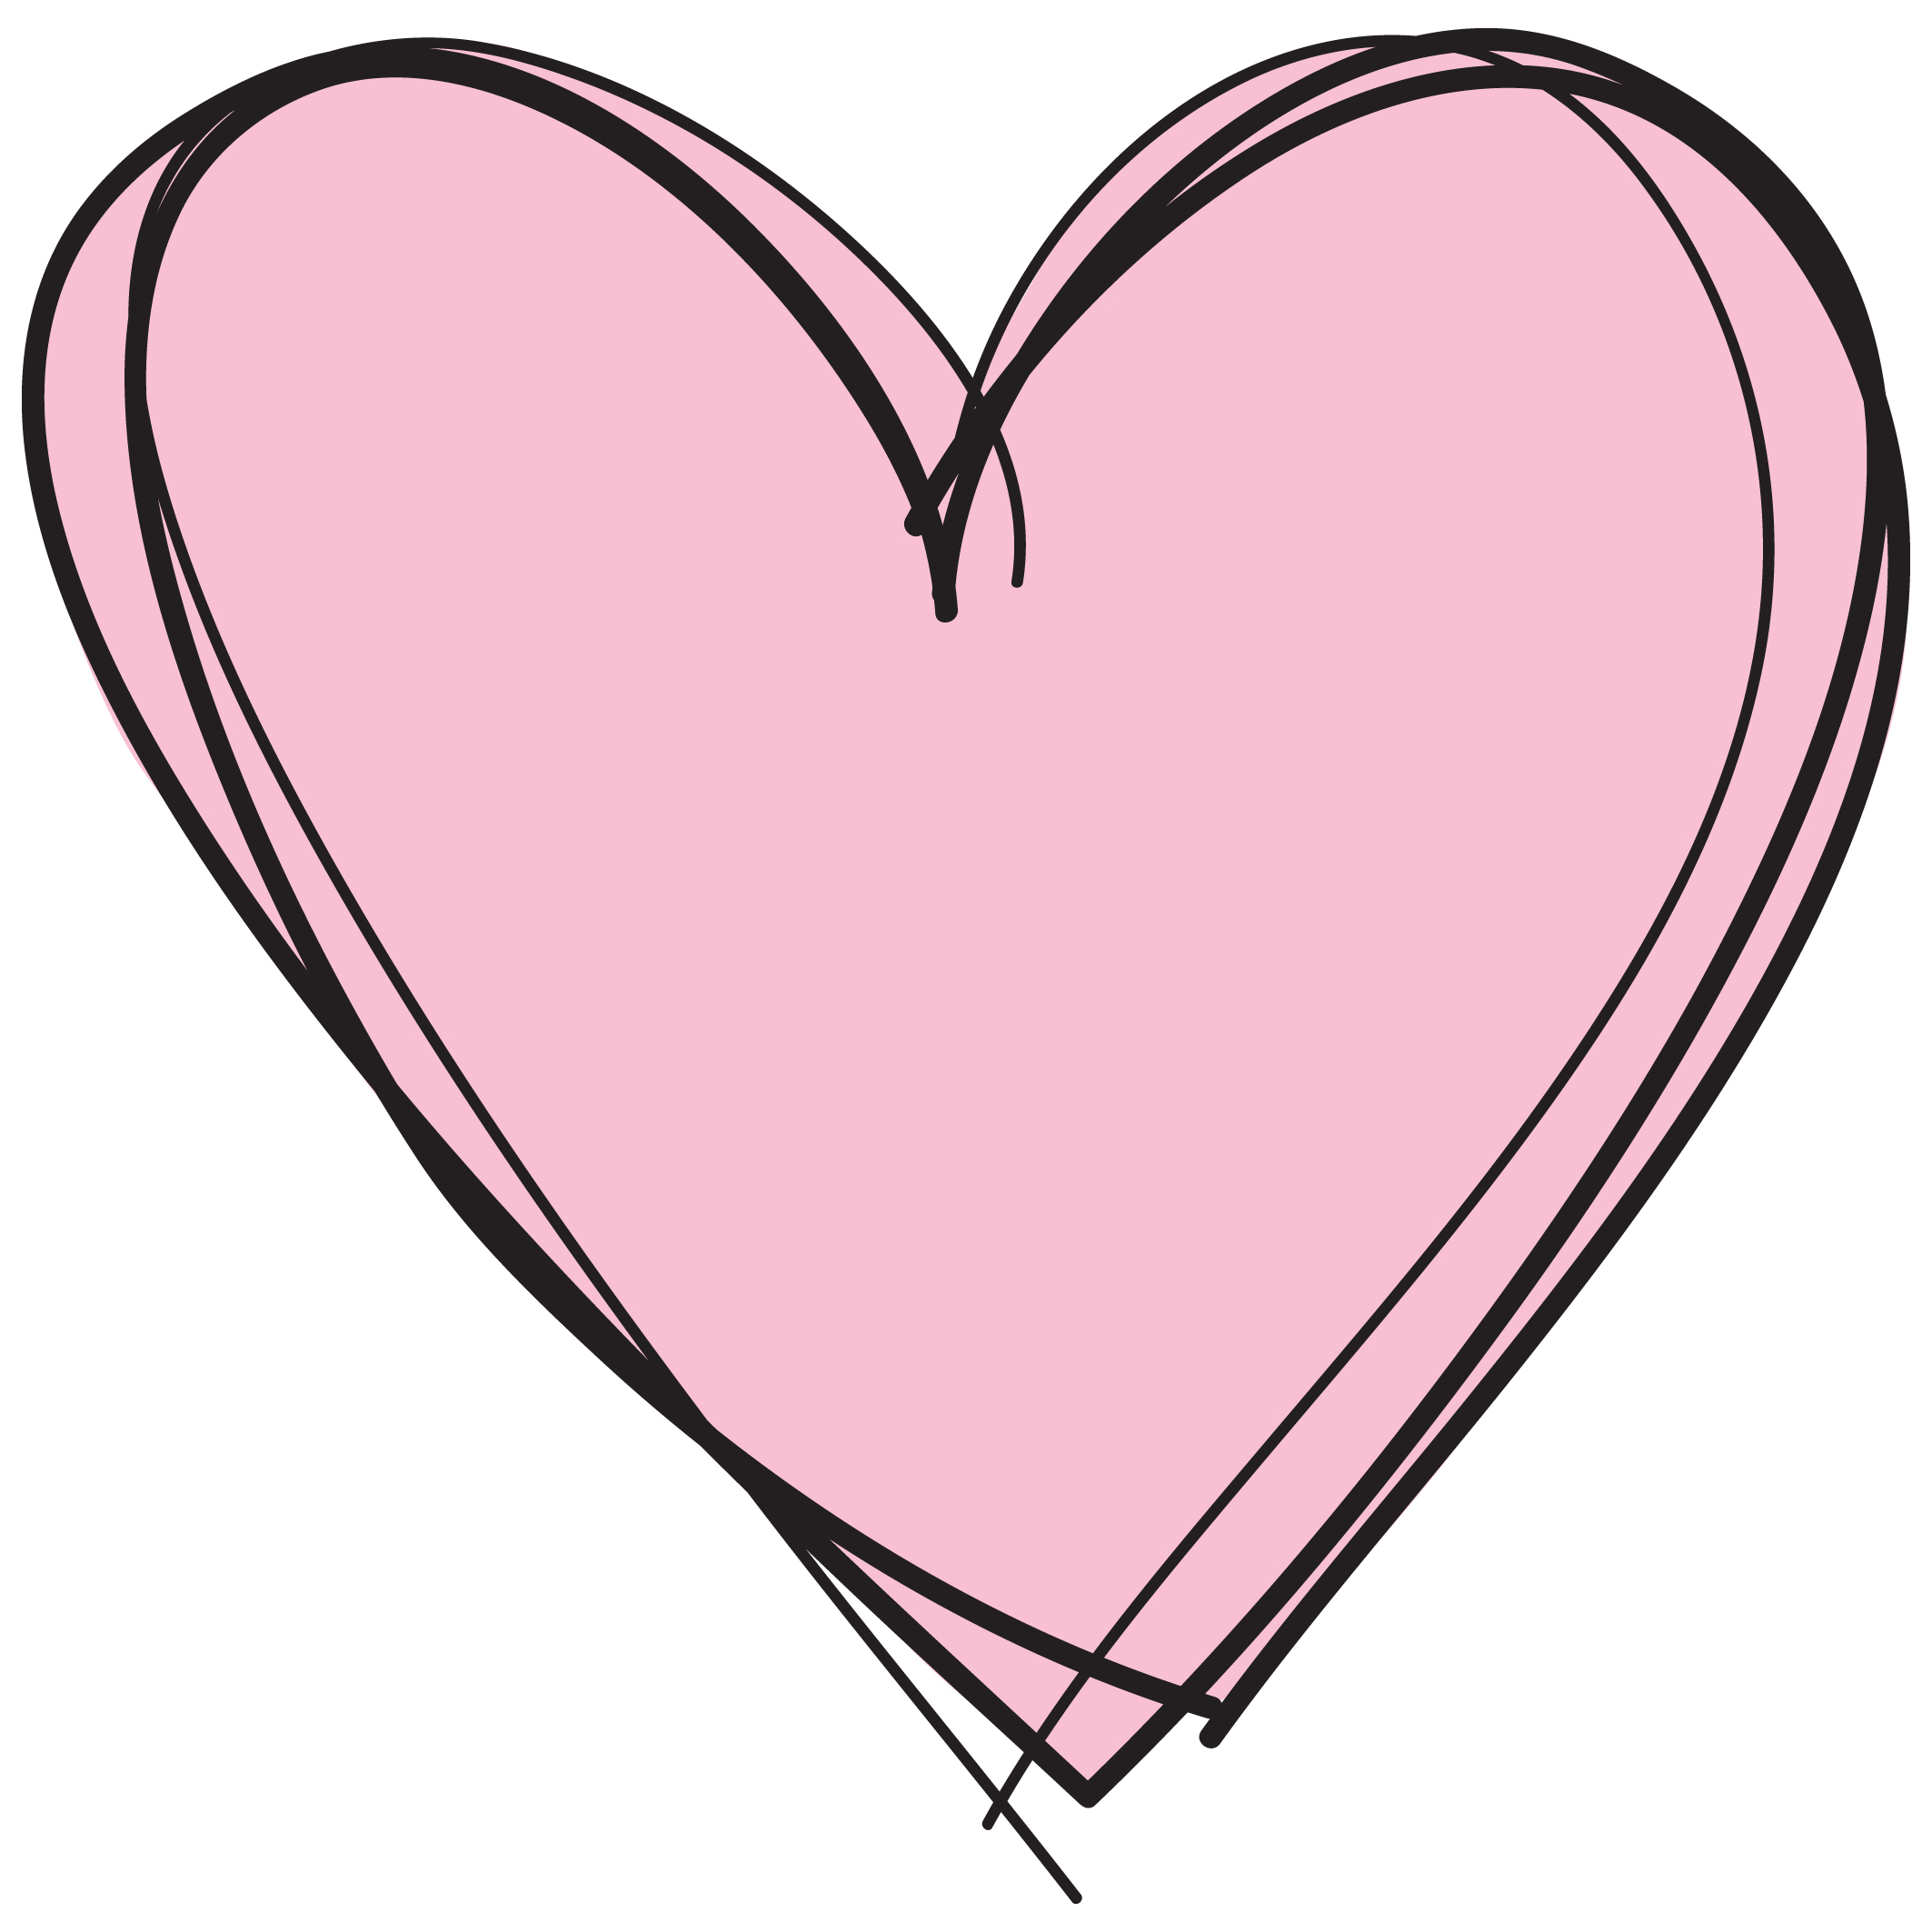 Real heart sketch free clipart images